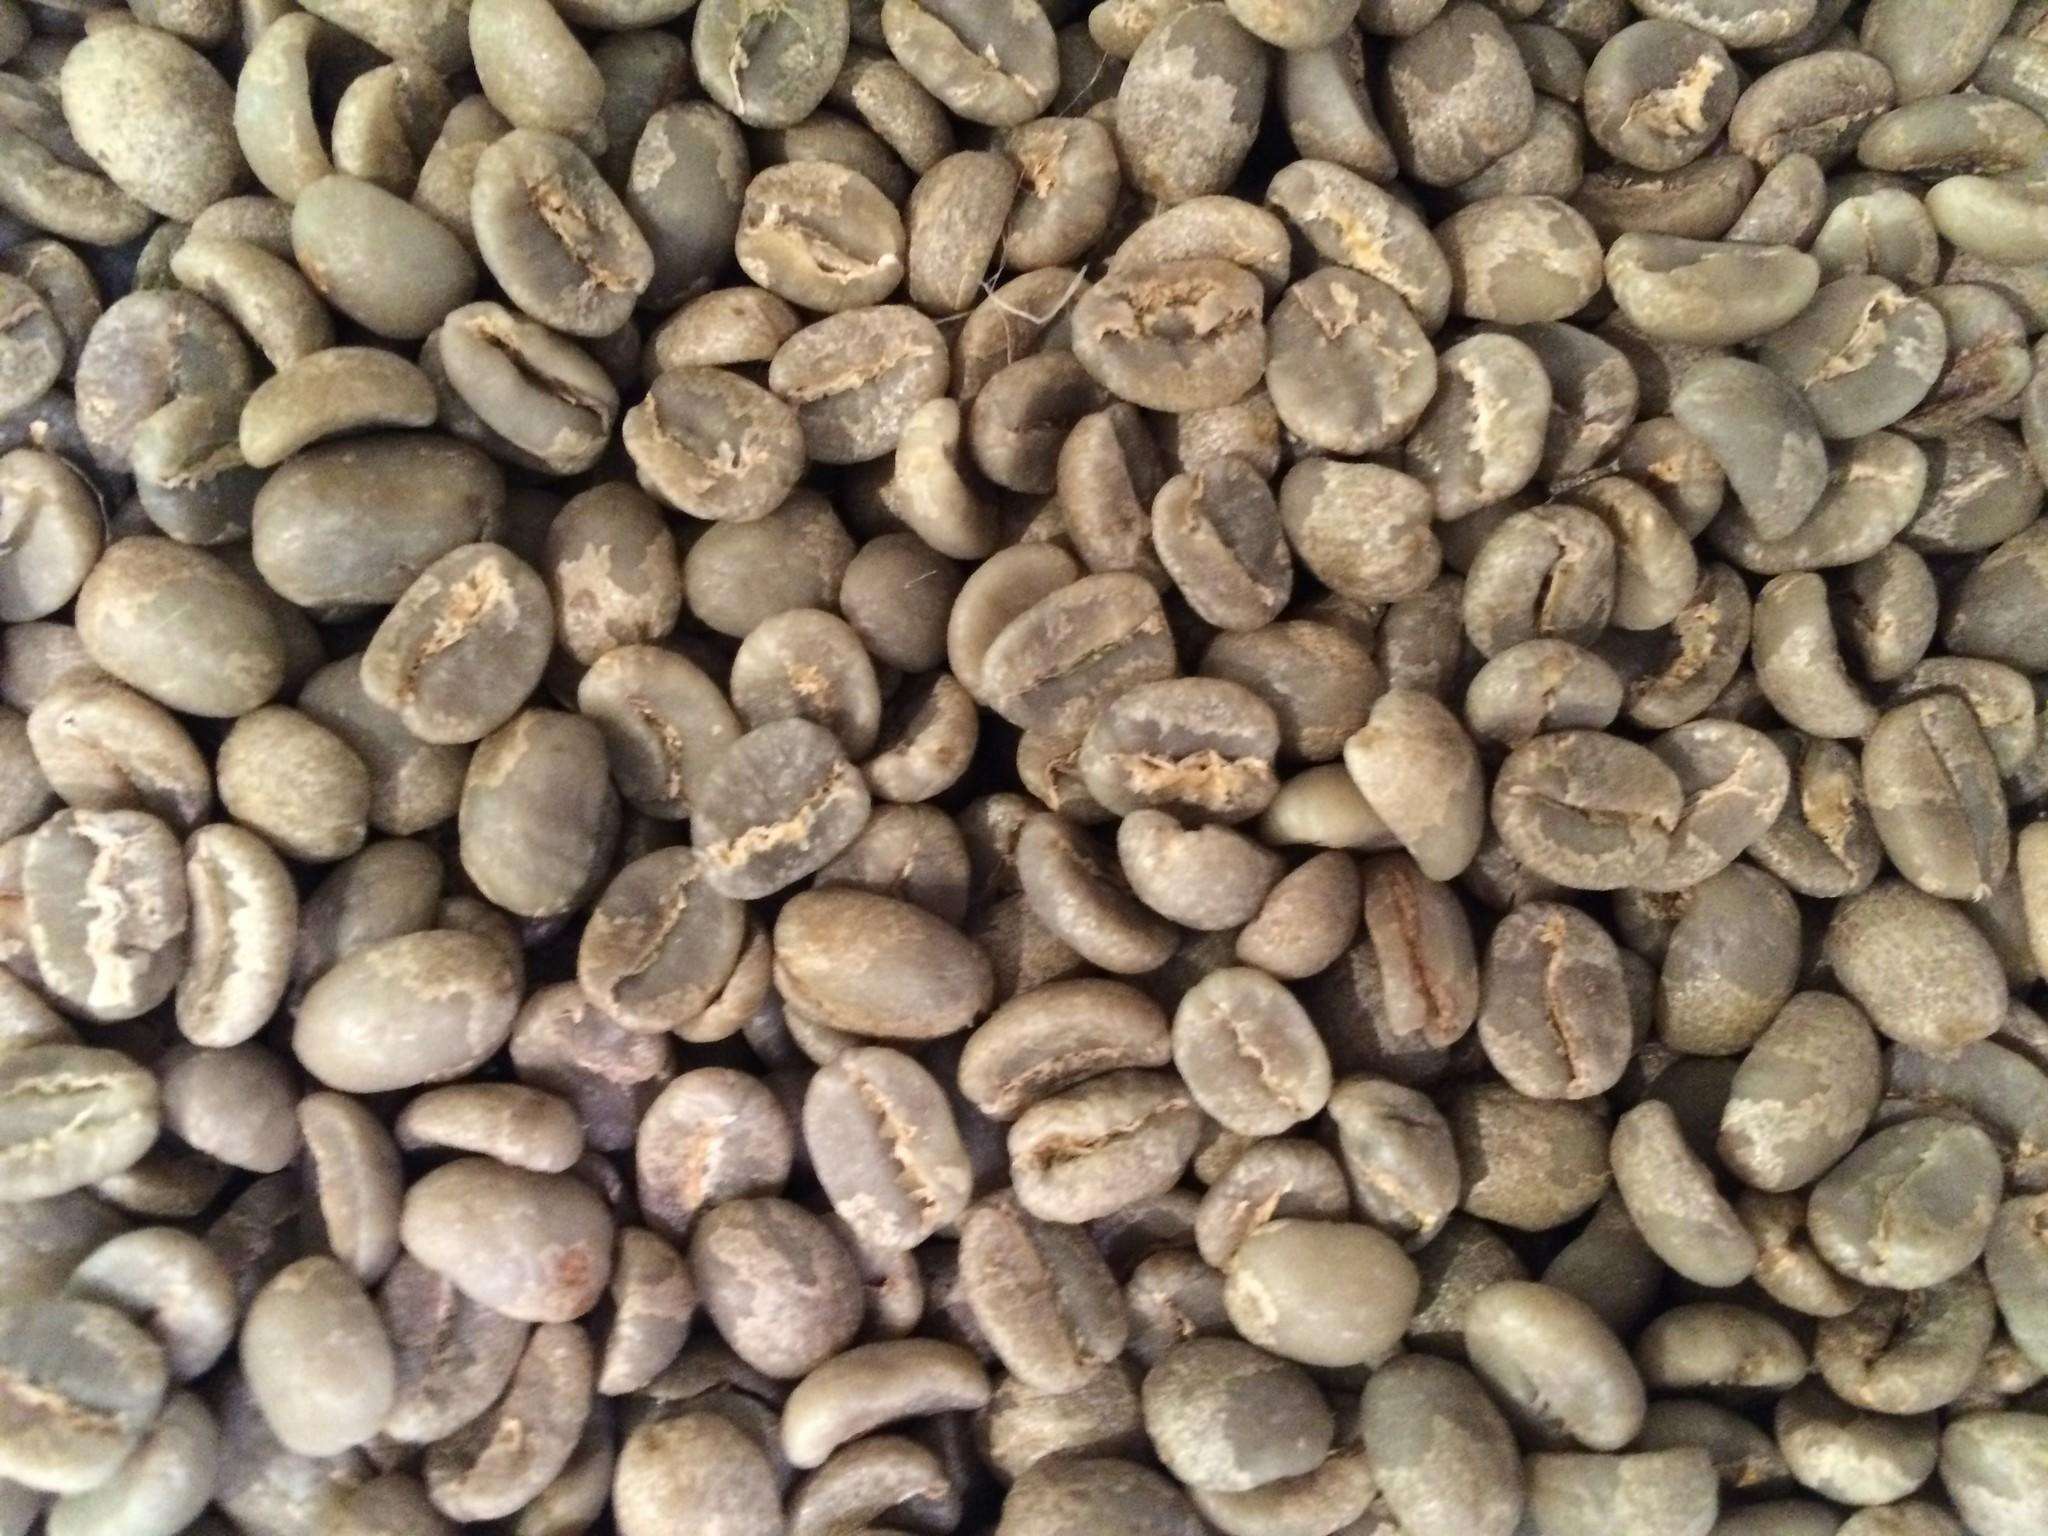 Coffee beans from green to dark